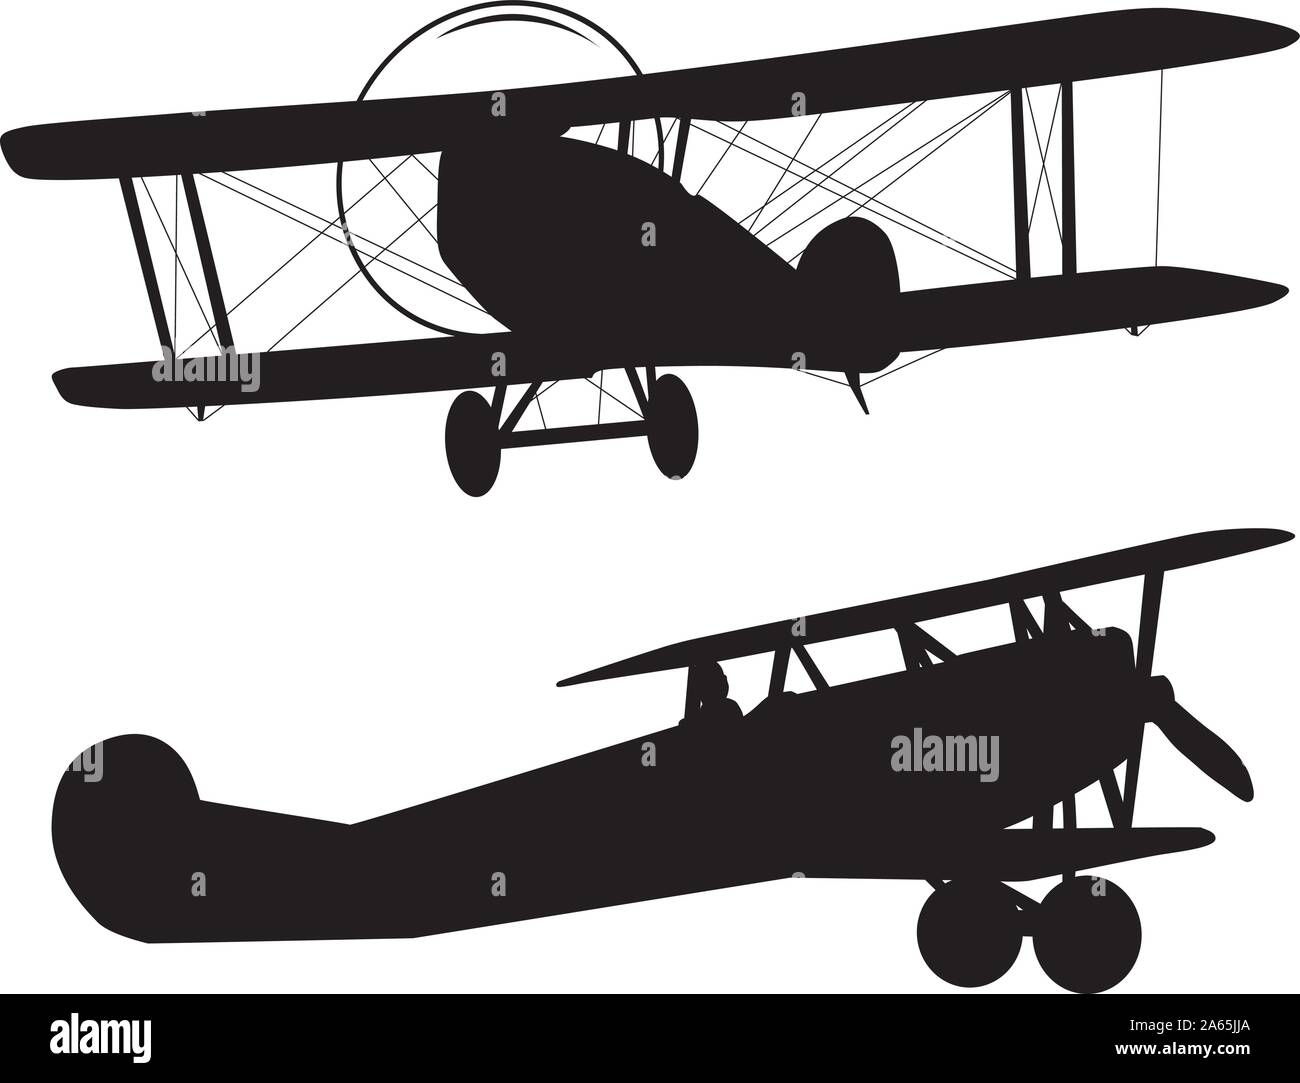 Vintage aircrafts silhouettes collection. Vector EPS 10 Stock Vector